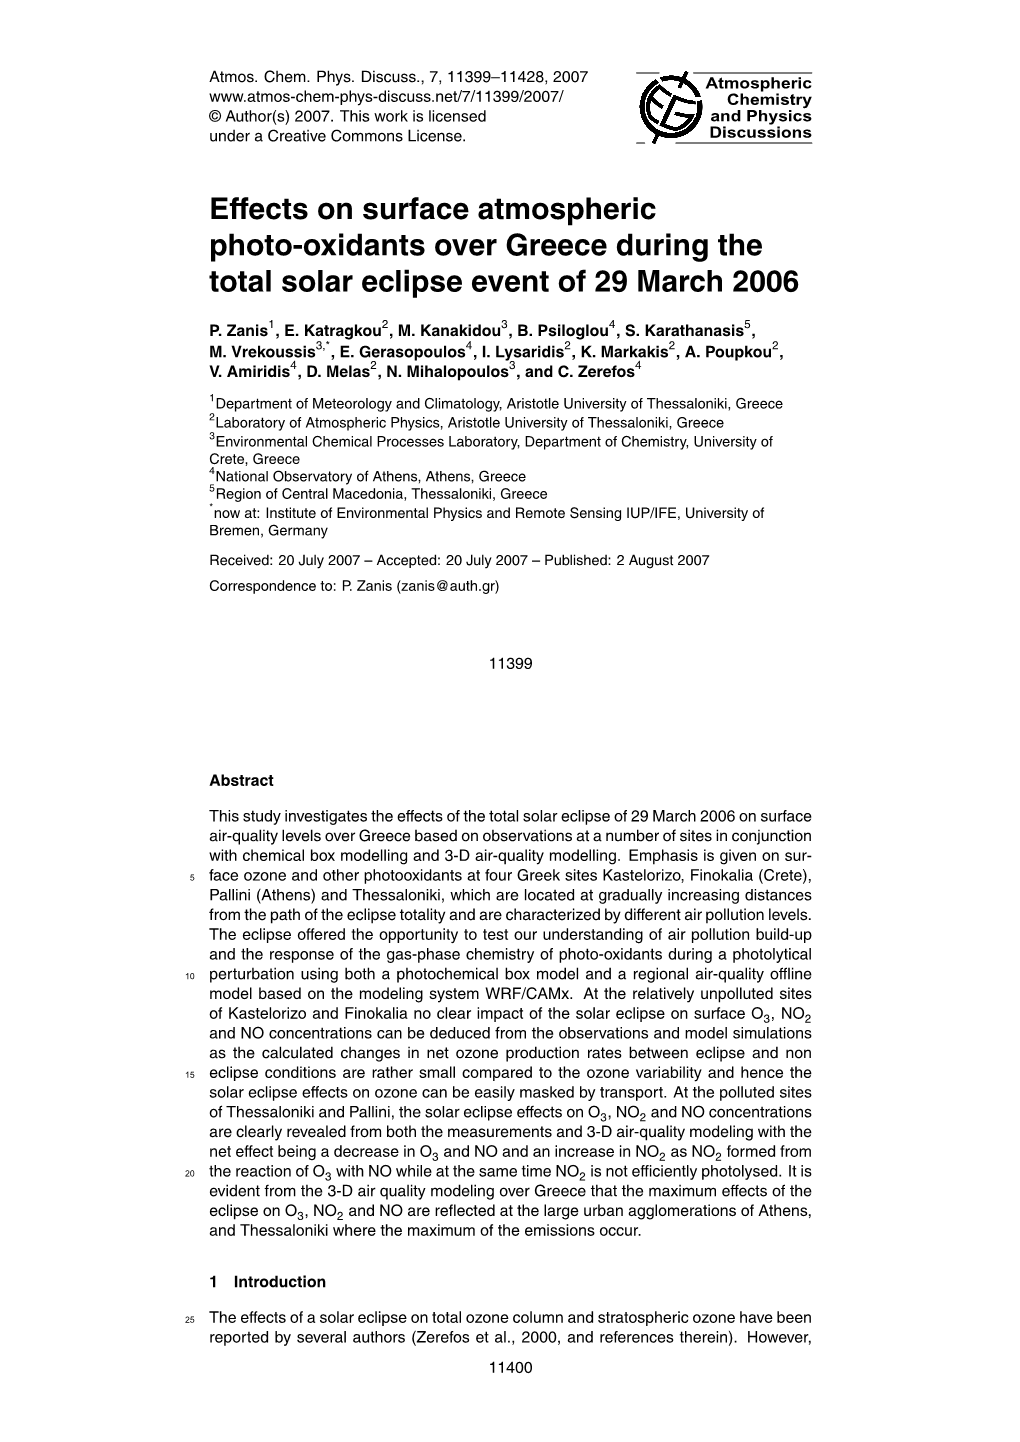 Effects on Surface Atmospheric Photo-Oxidants Over Greece During